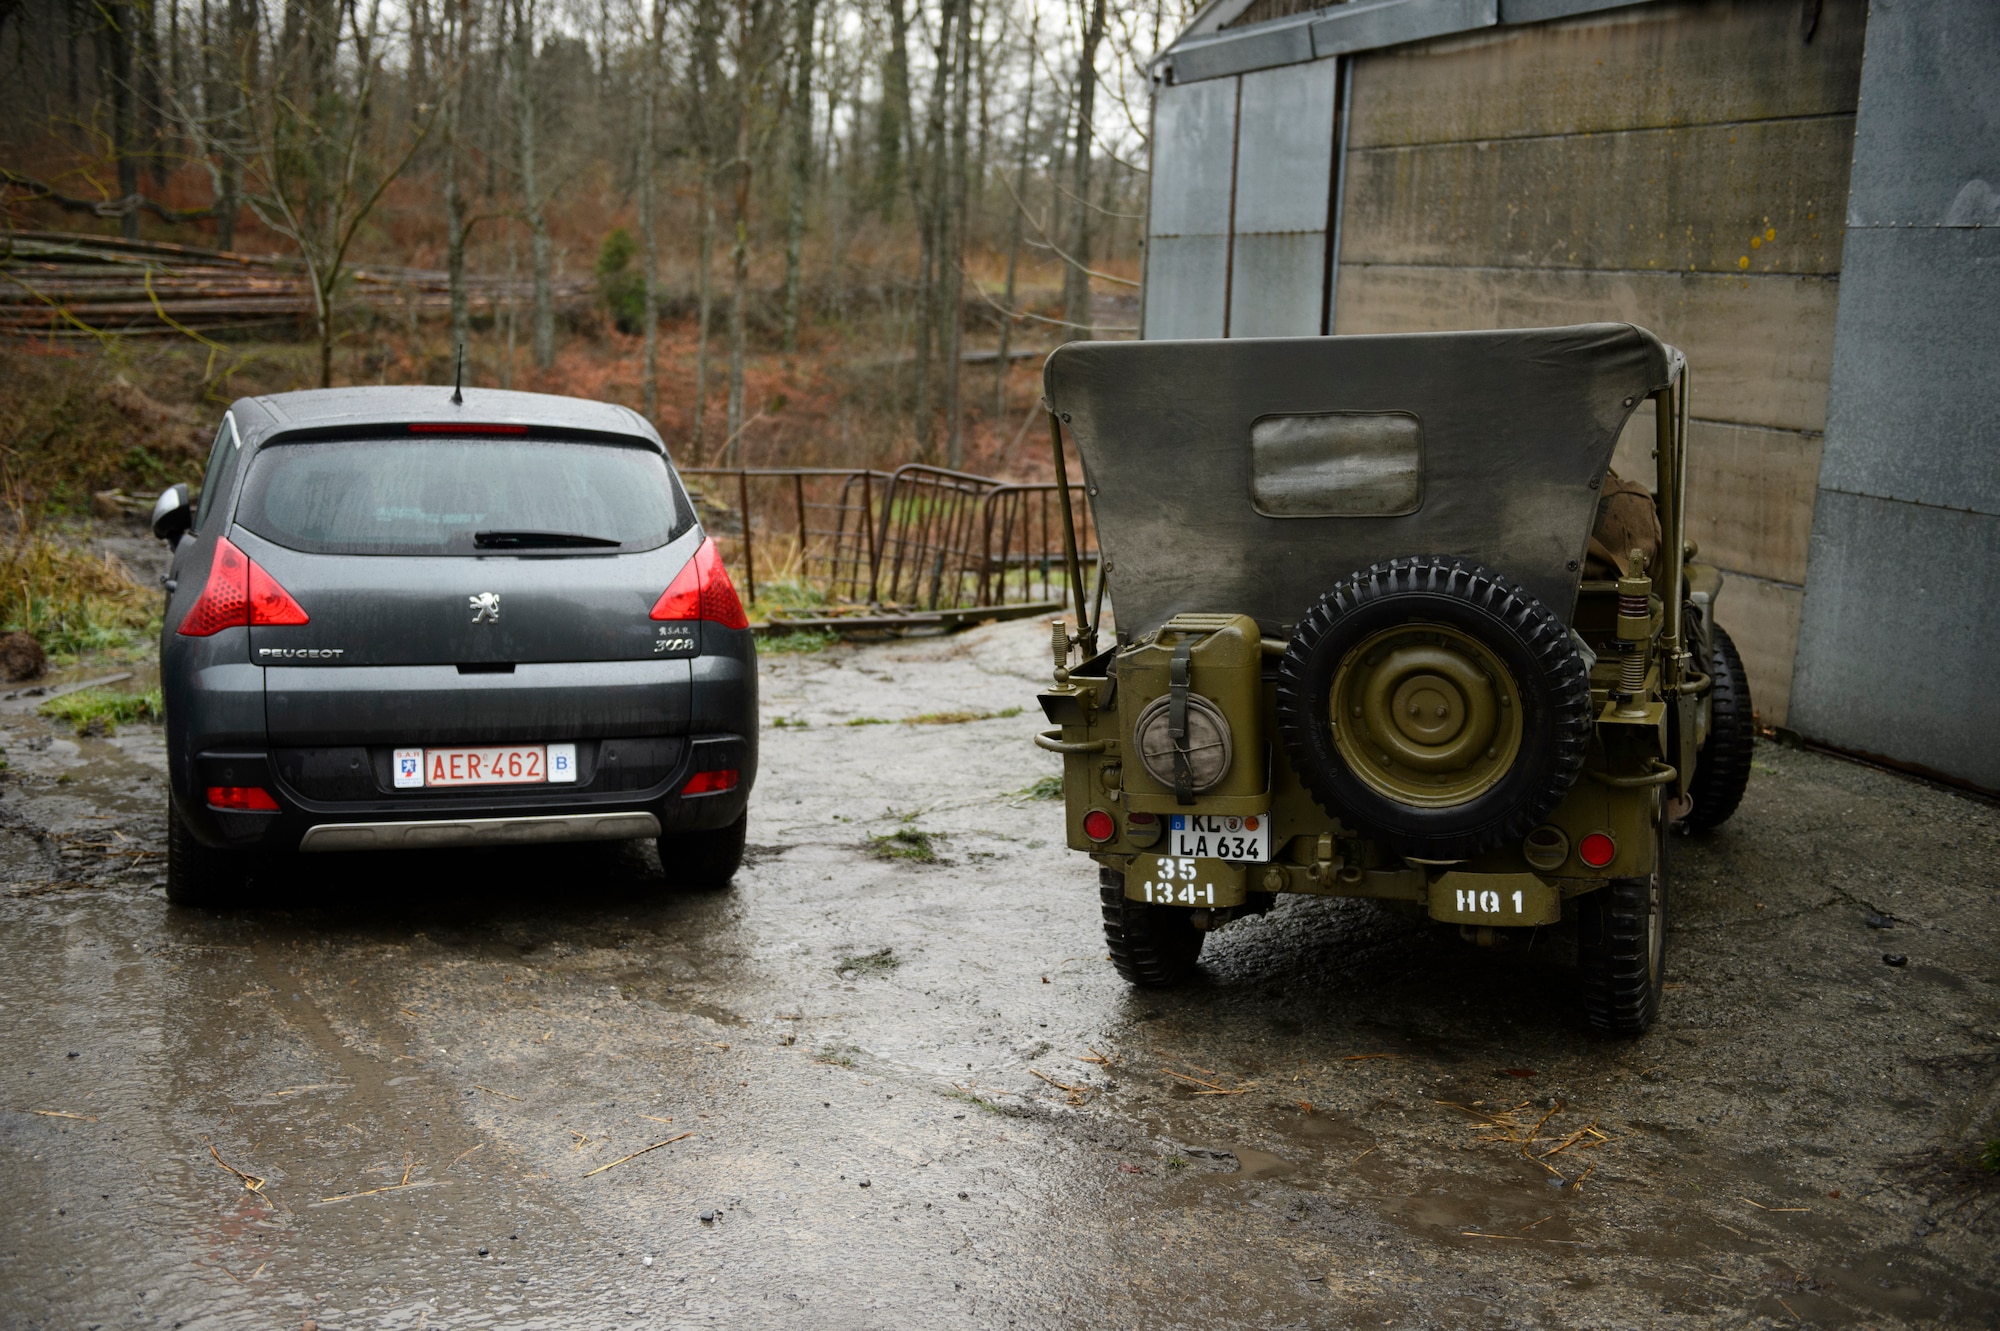 BASTOGNE, Belgium – A World War II era jeep is parked next to a newer car during the Bastogne Historic Walk Dec. 15, 2012. Memorabilia is not just limited to uniforms, insignias and weapons, but also includes standard-issue tents and vehicles from the era. (U.S. Air Force photo by Staff Sgt. Nathanael Callon/Released)